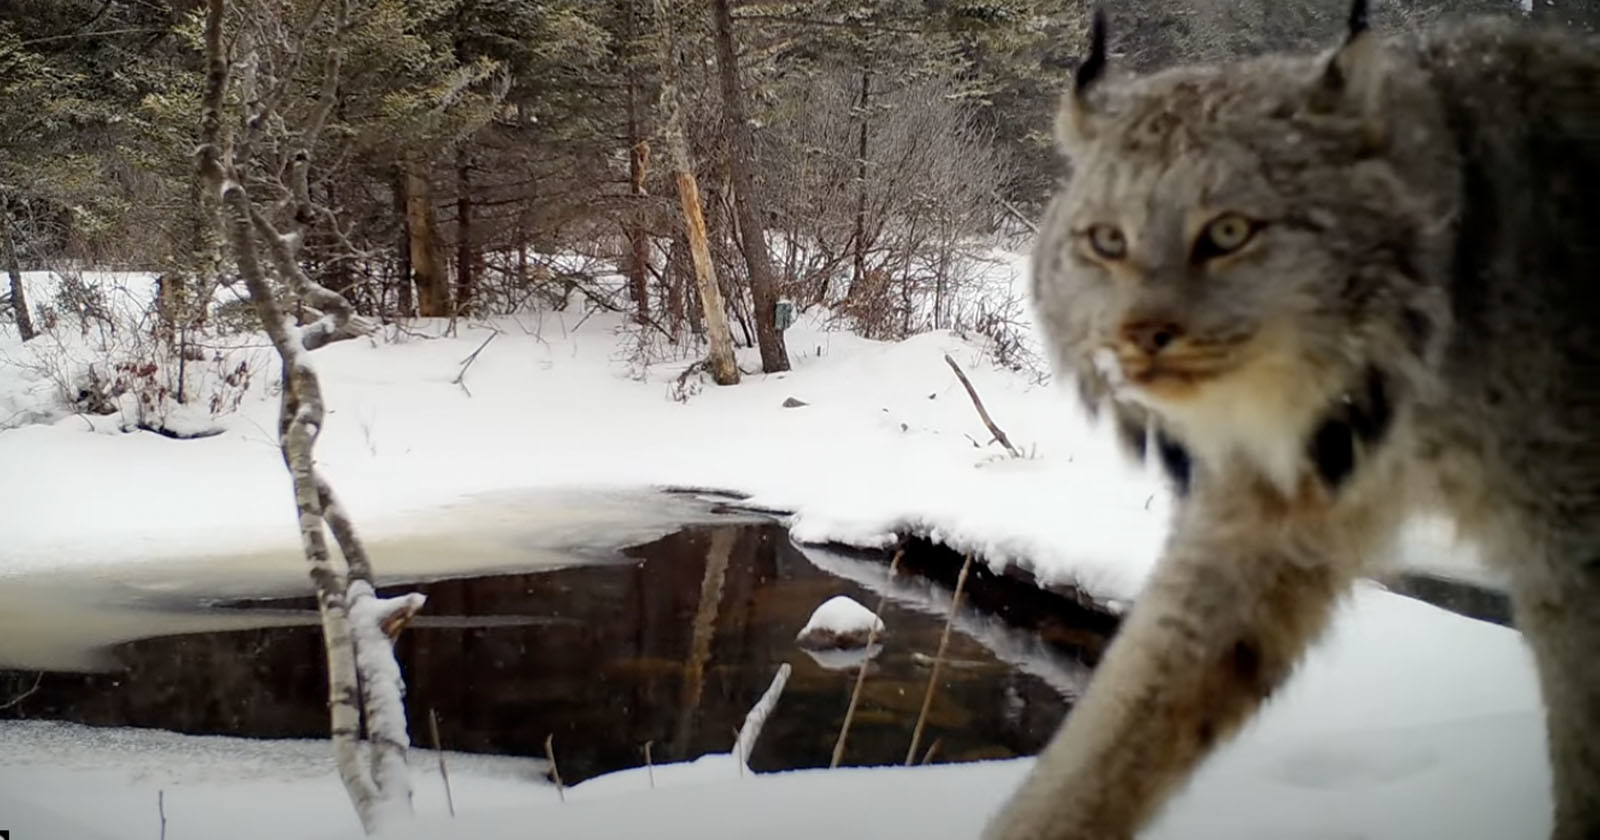 Photographer Records Stunning Footage of Lynx in Snowy Forest